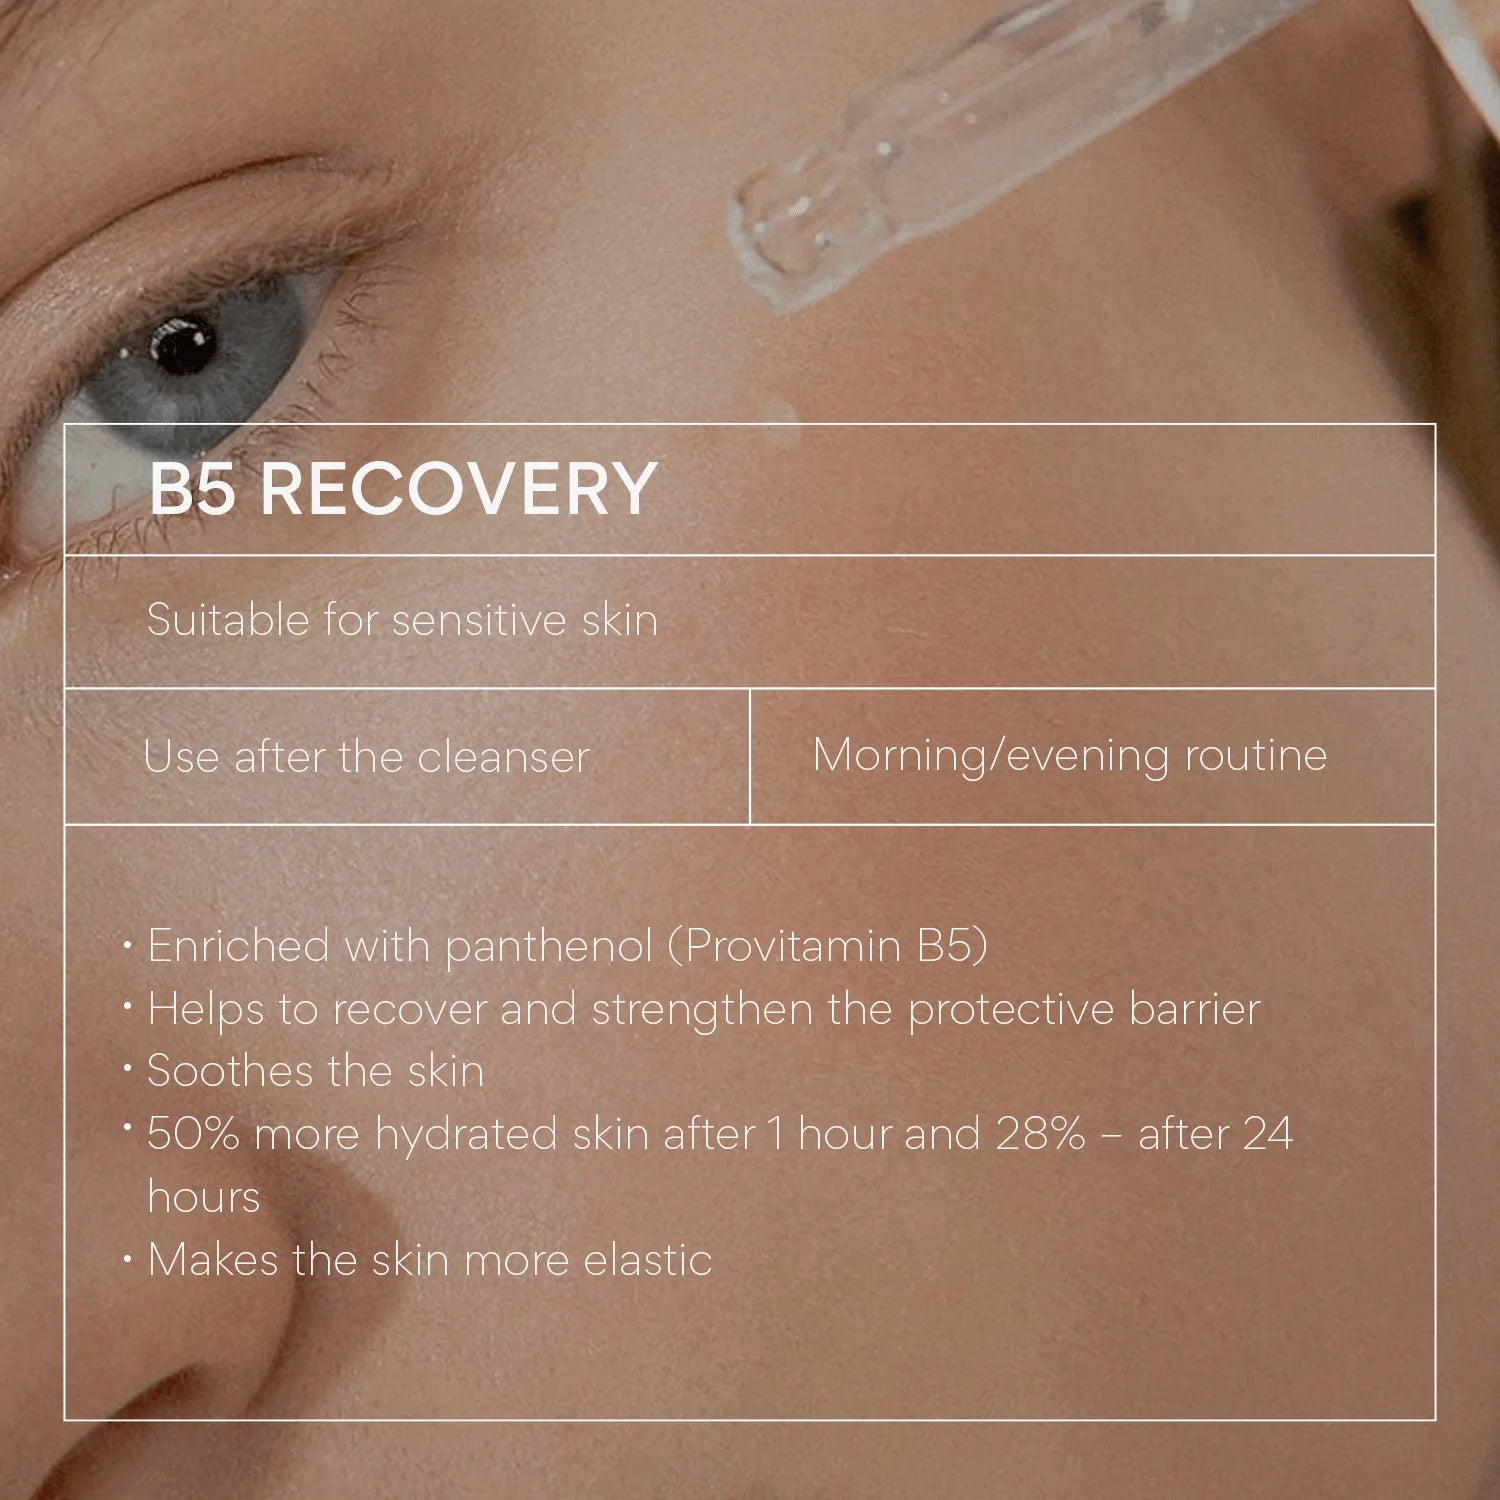 B5 RECOVERY Regenerating serum for compromised skin